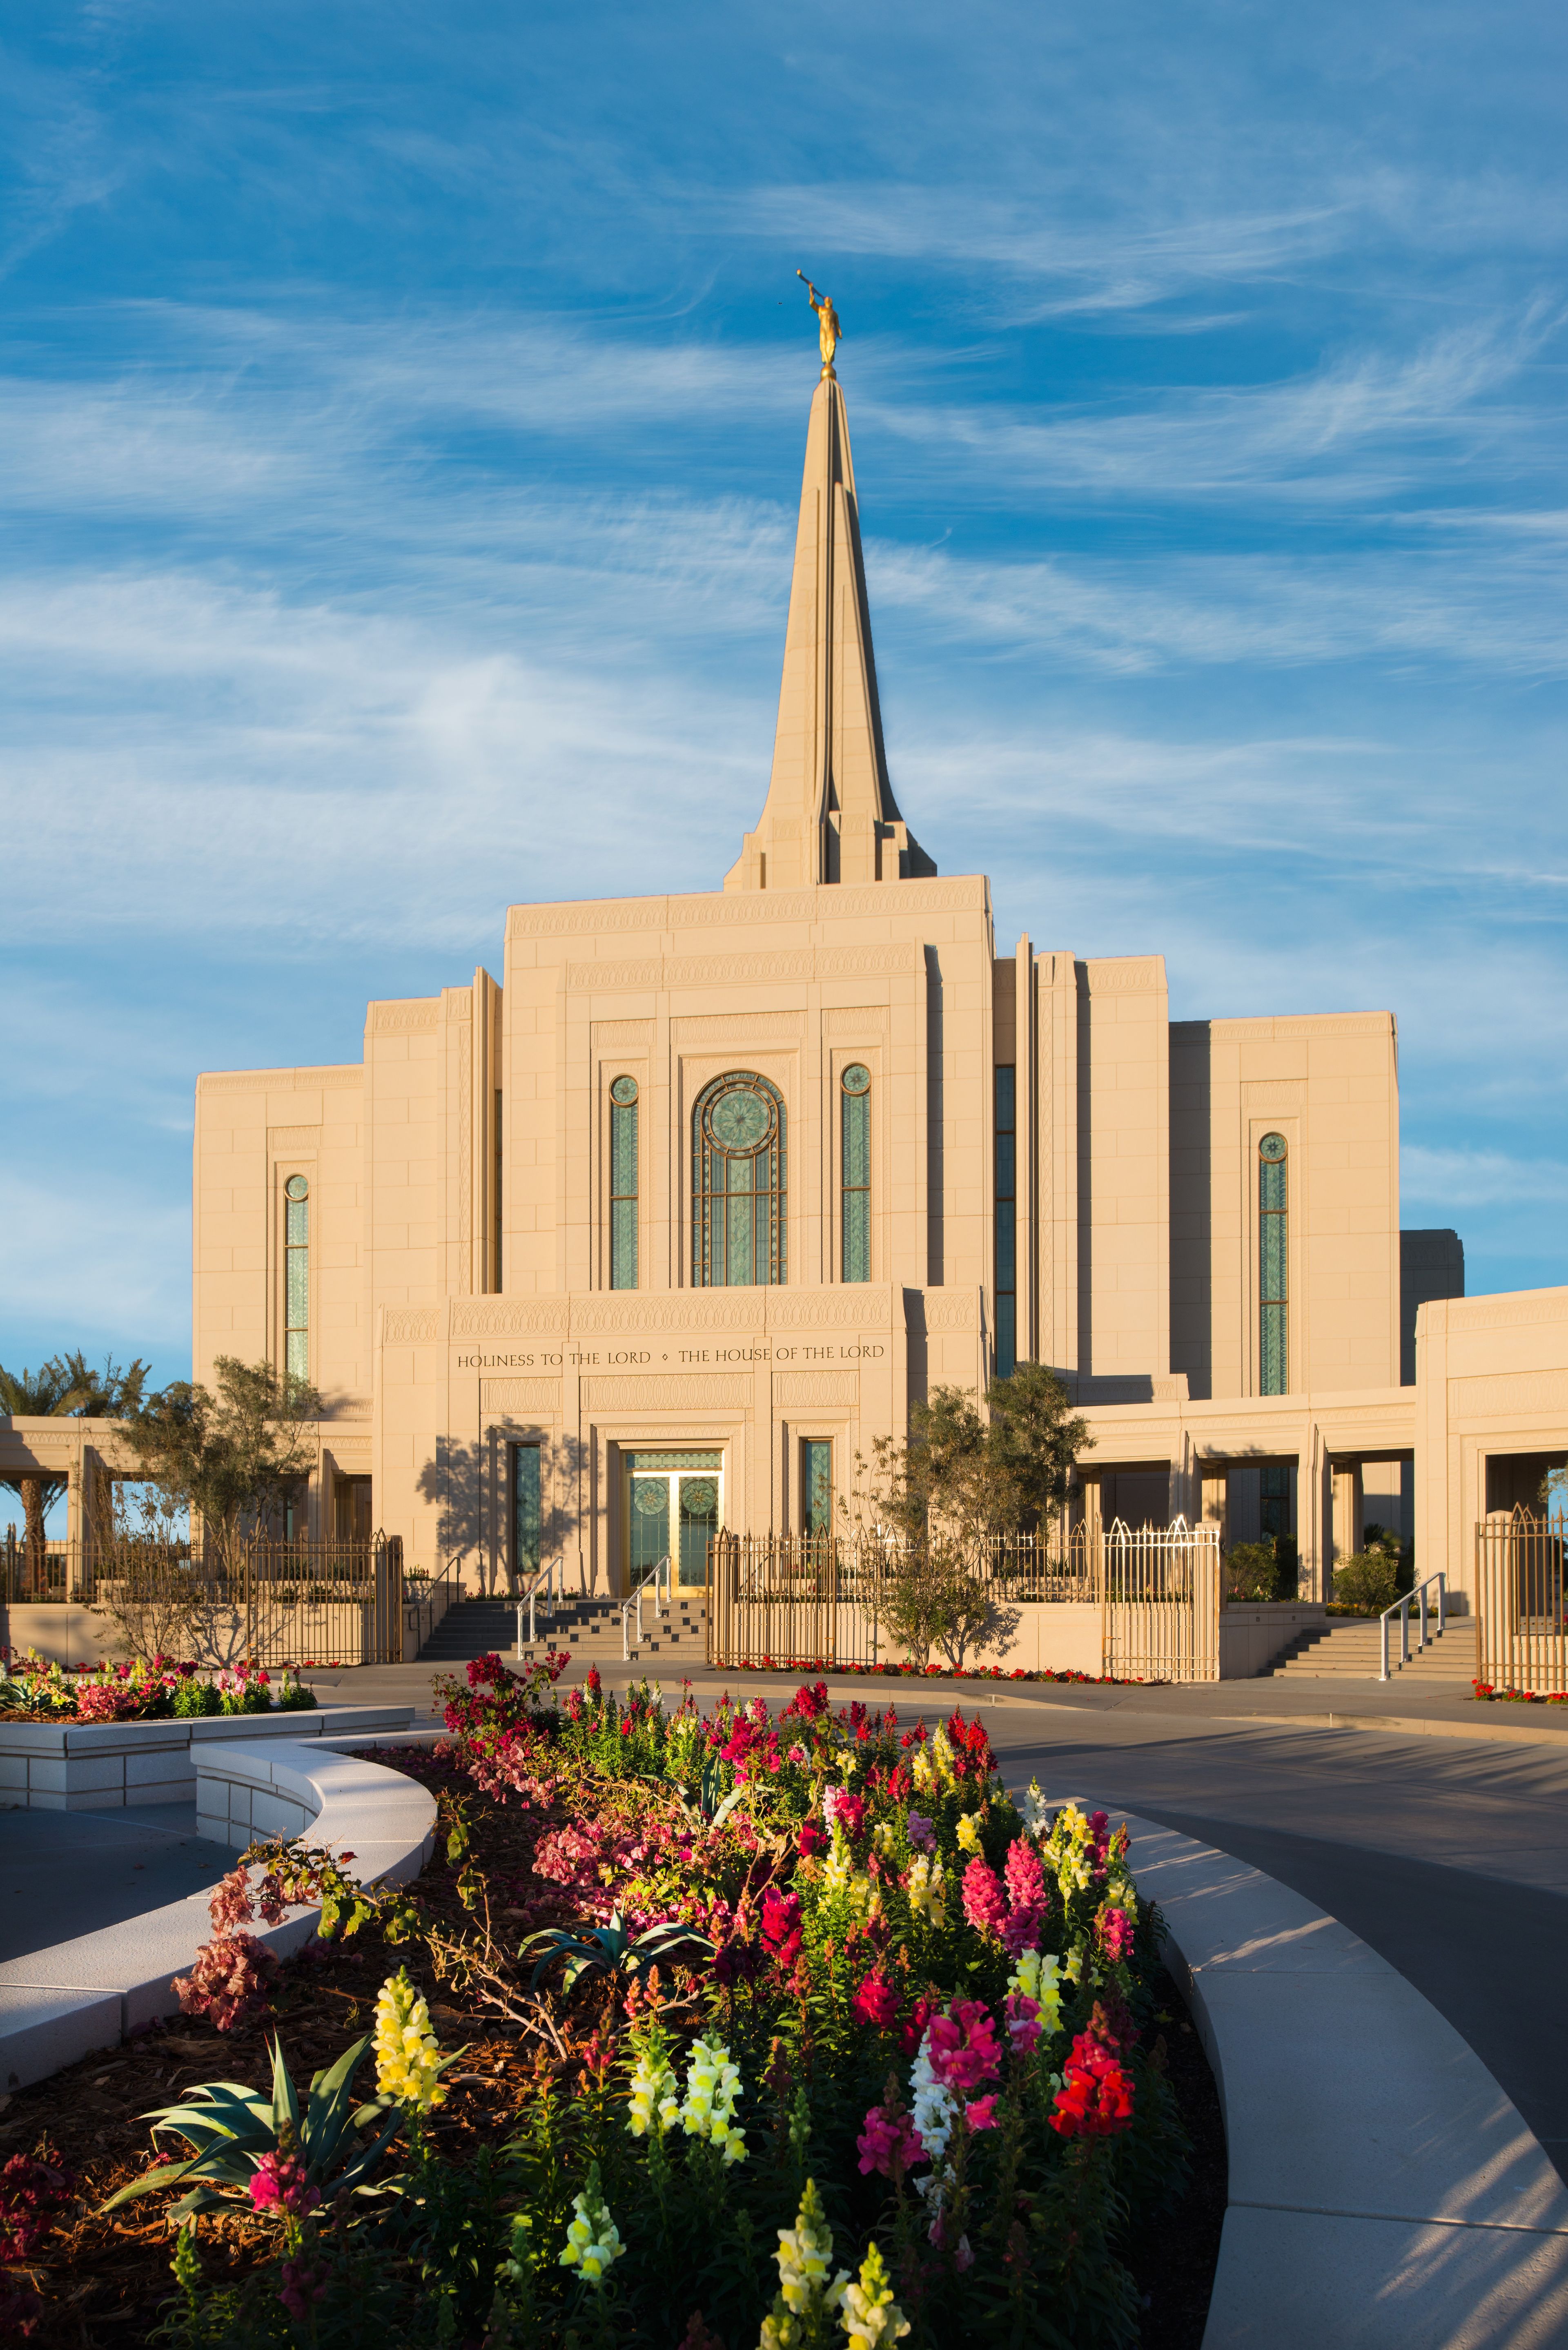 A portrait view of the Gilbert Arizona Temple.